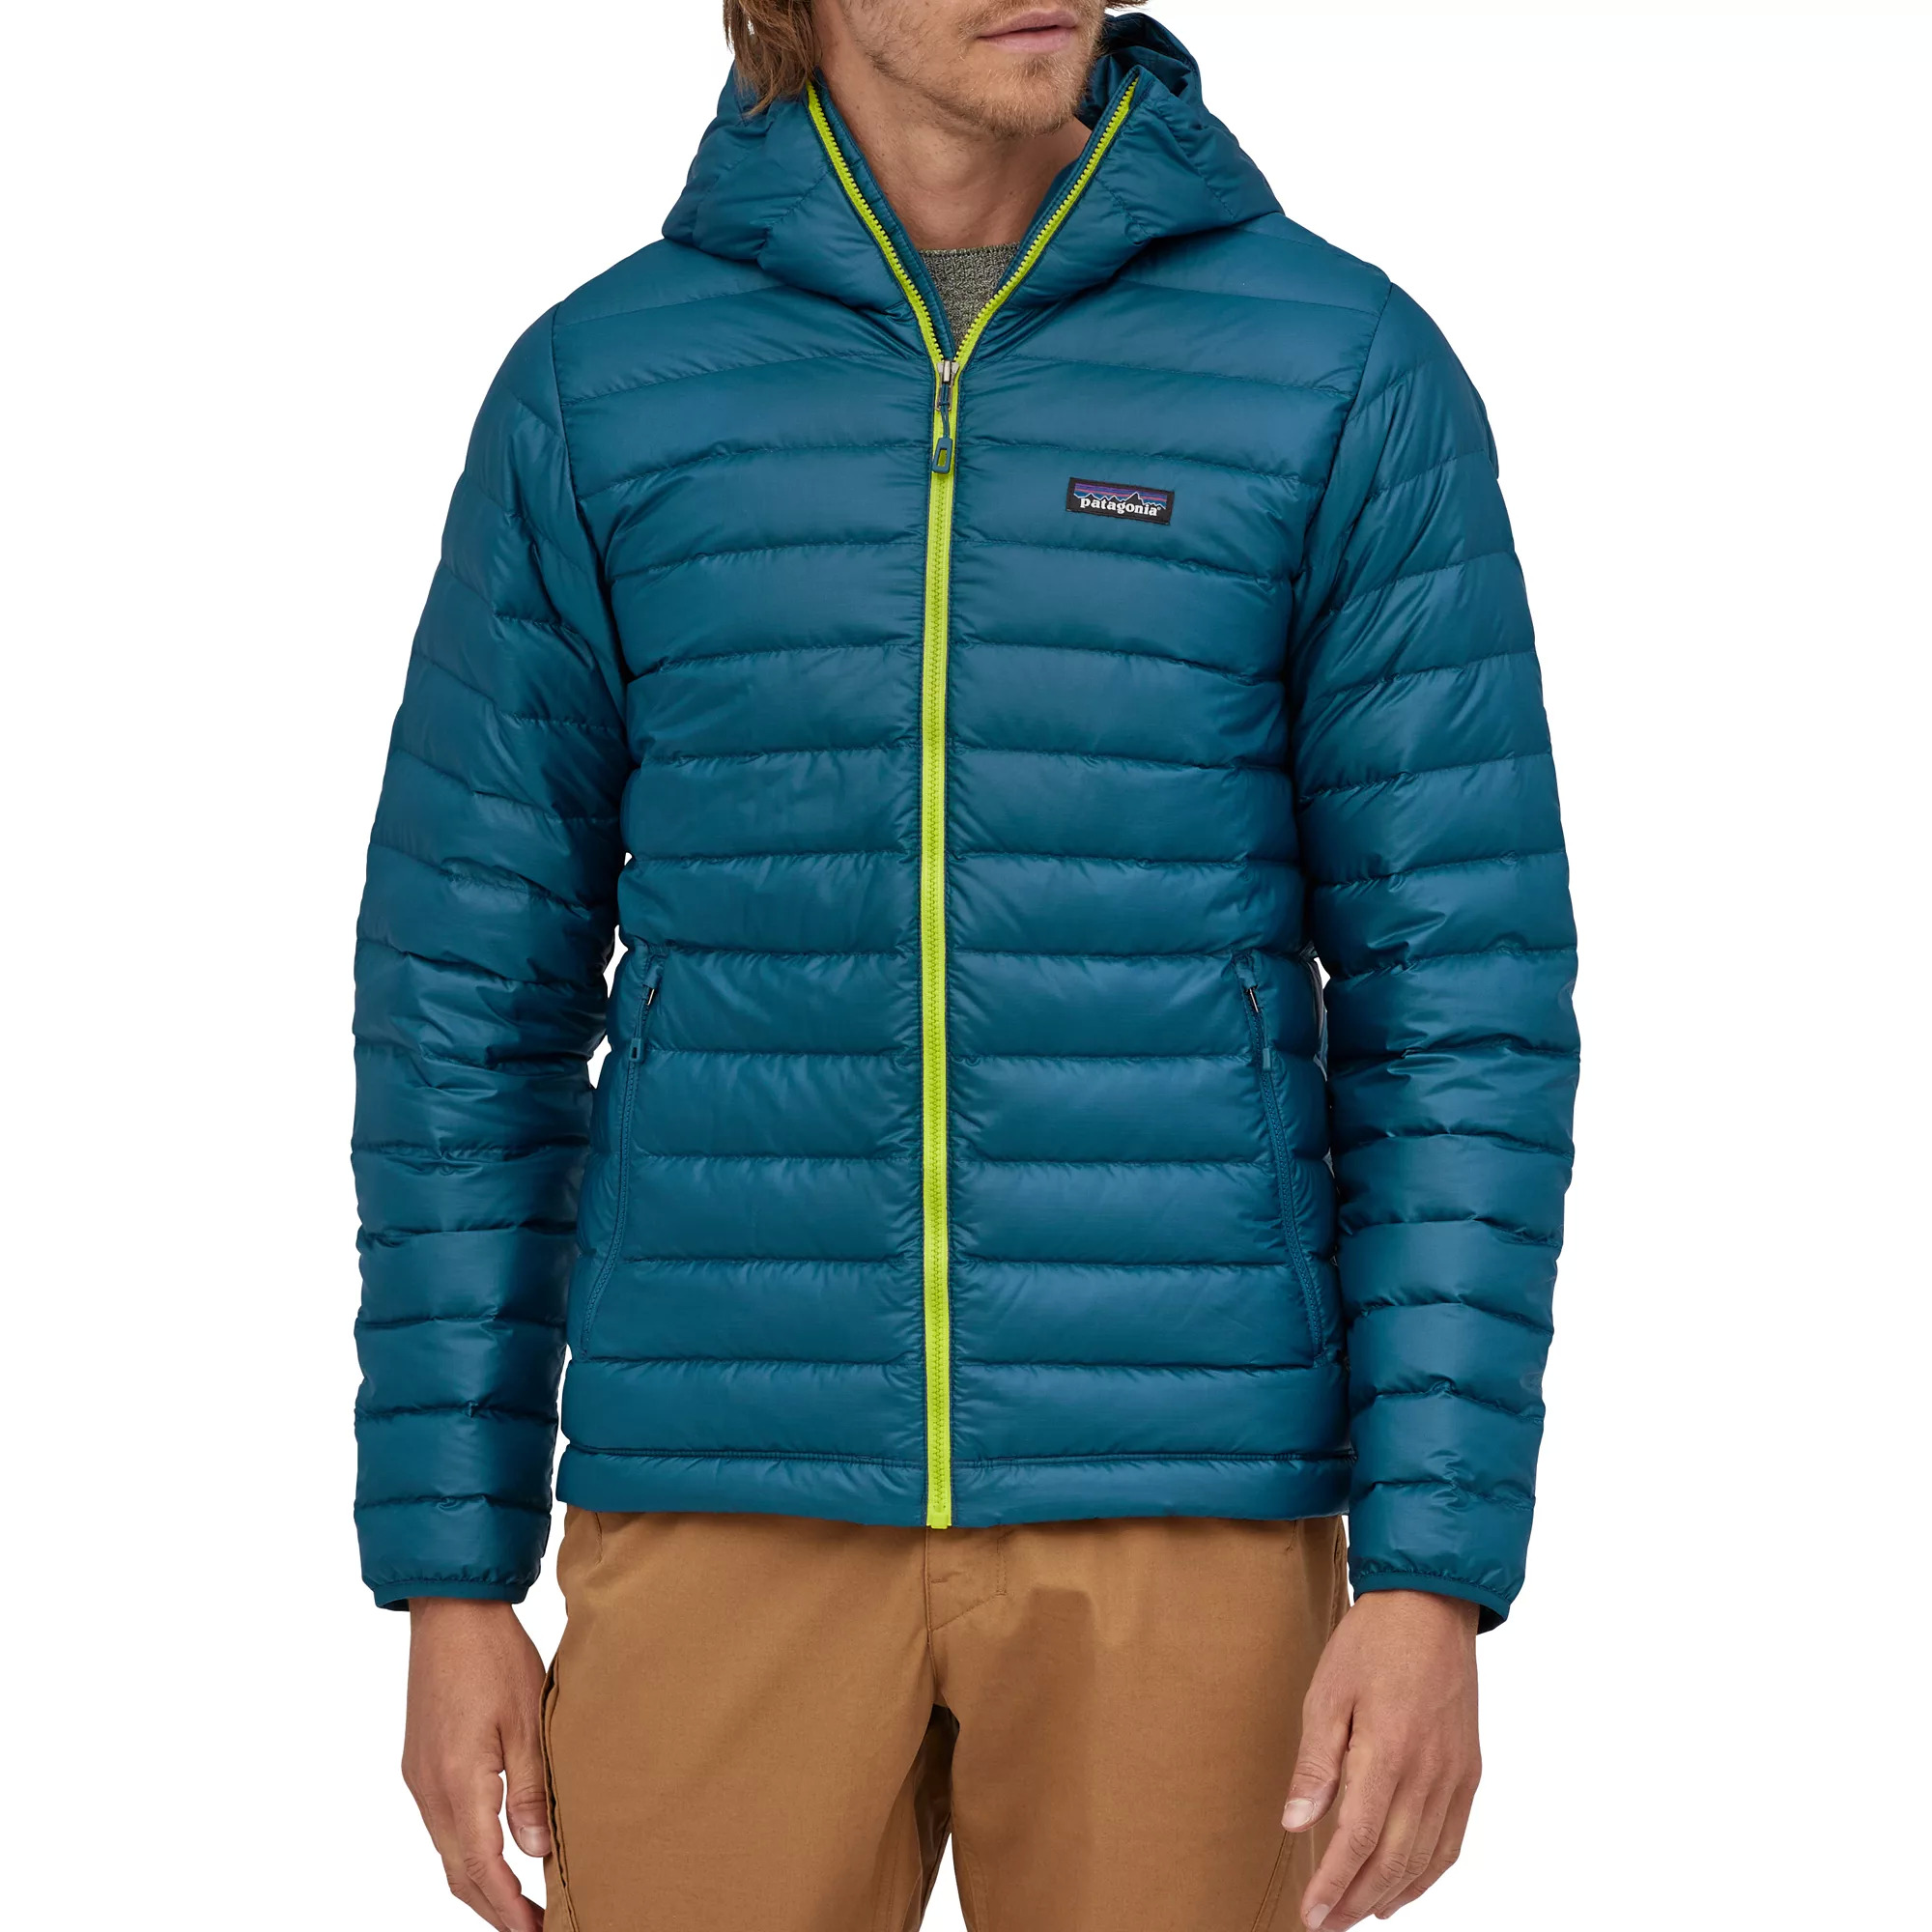 Patagonia Men's Down Sweater Hoody Jacket - Crater Blue $189.97 + Free S&H